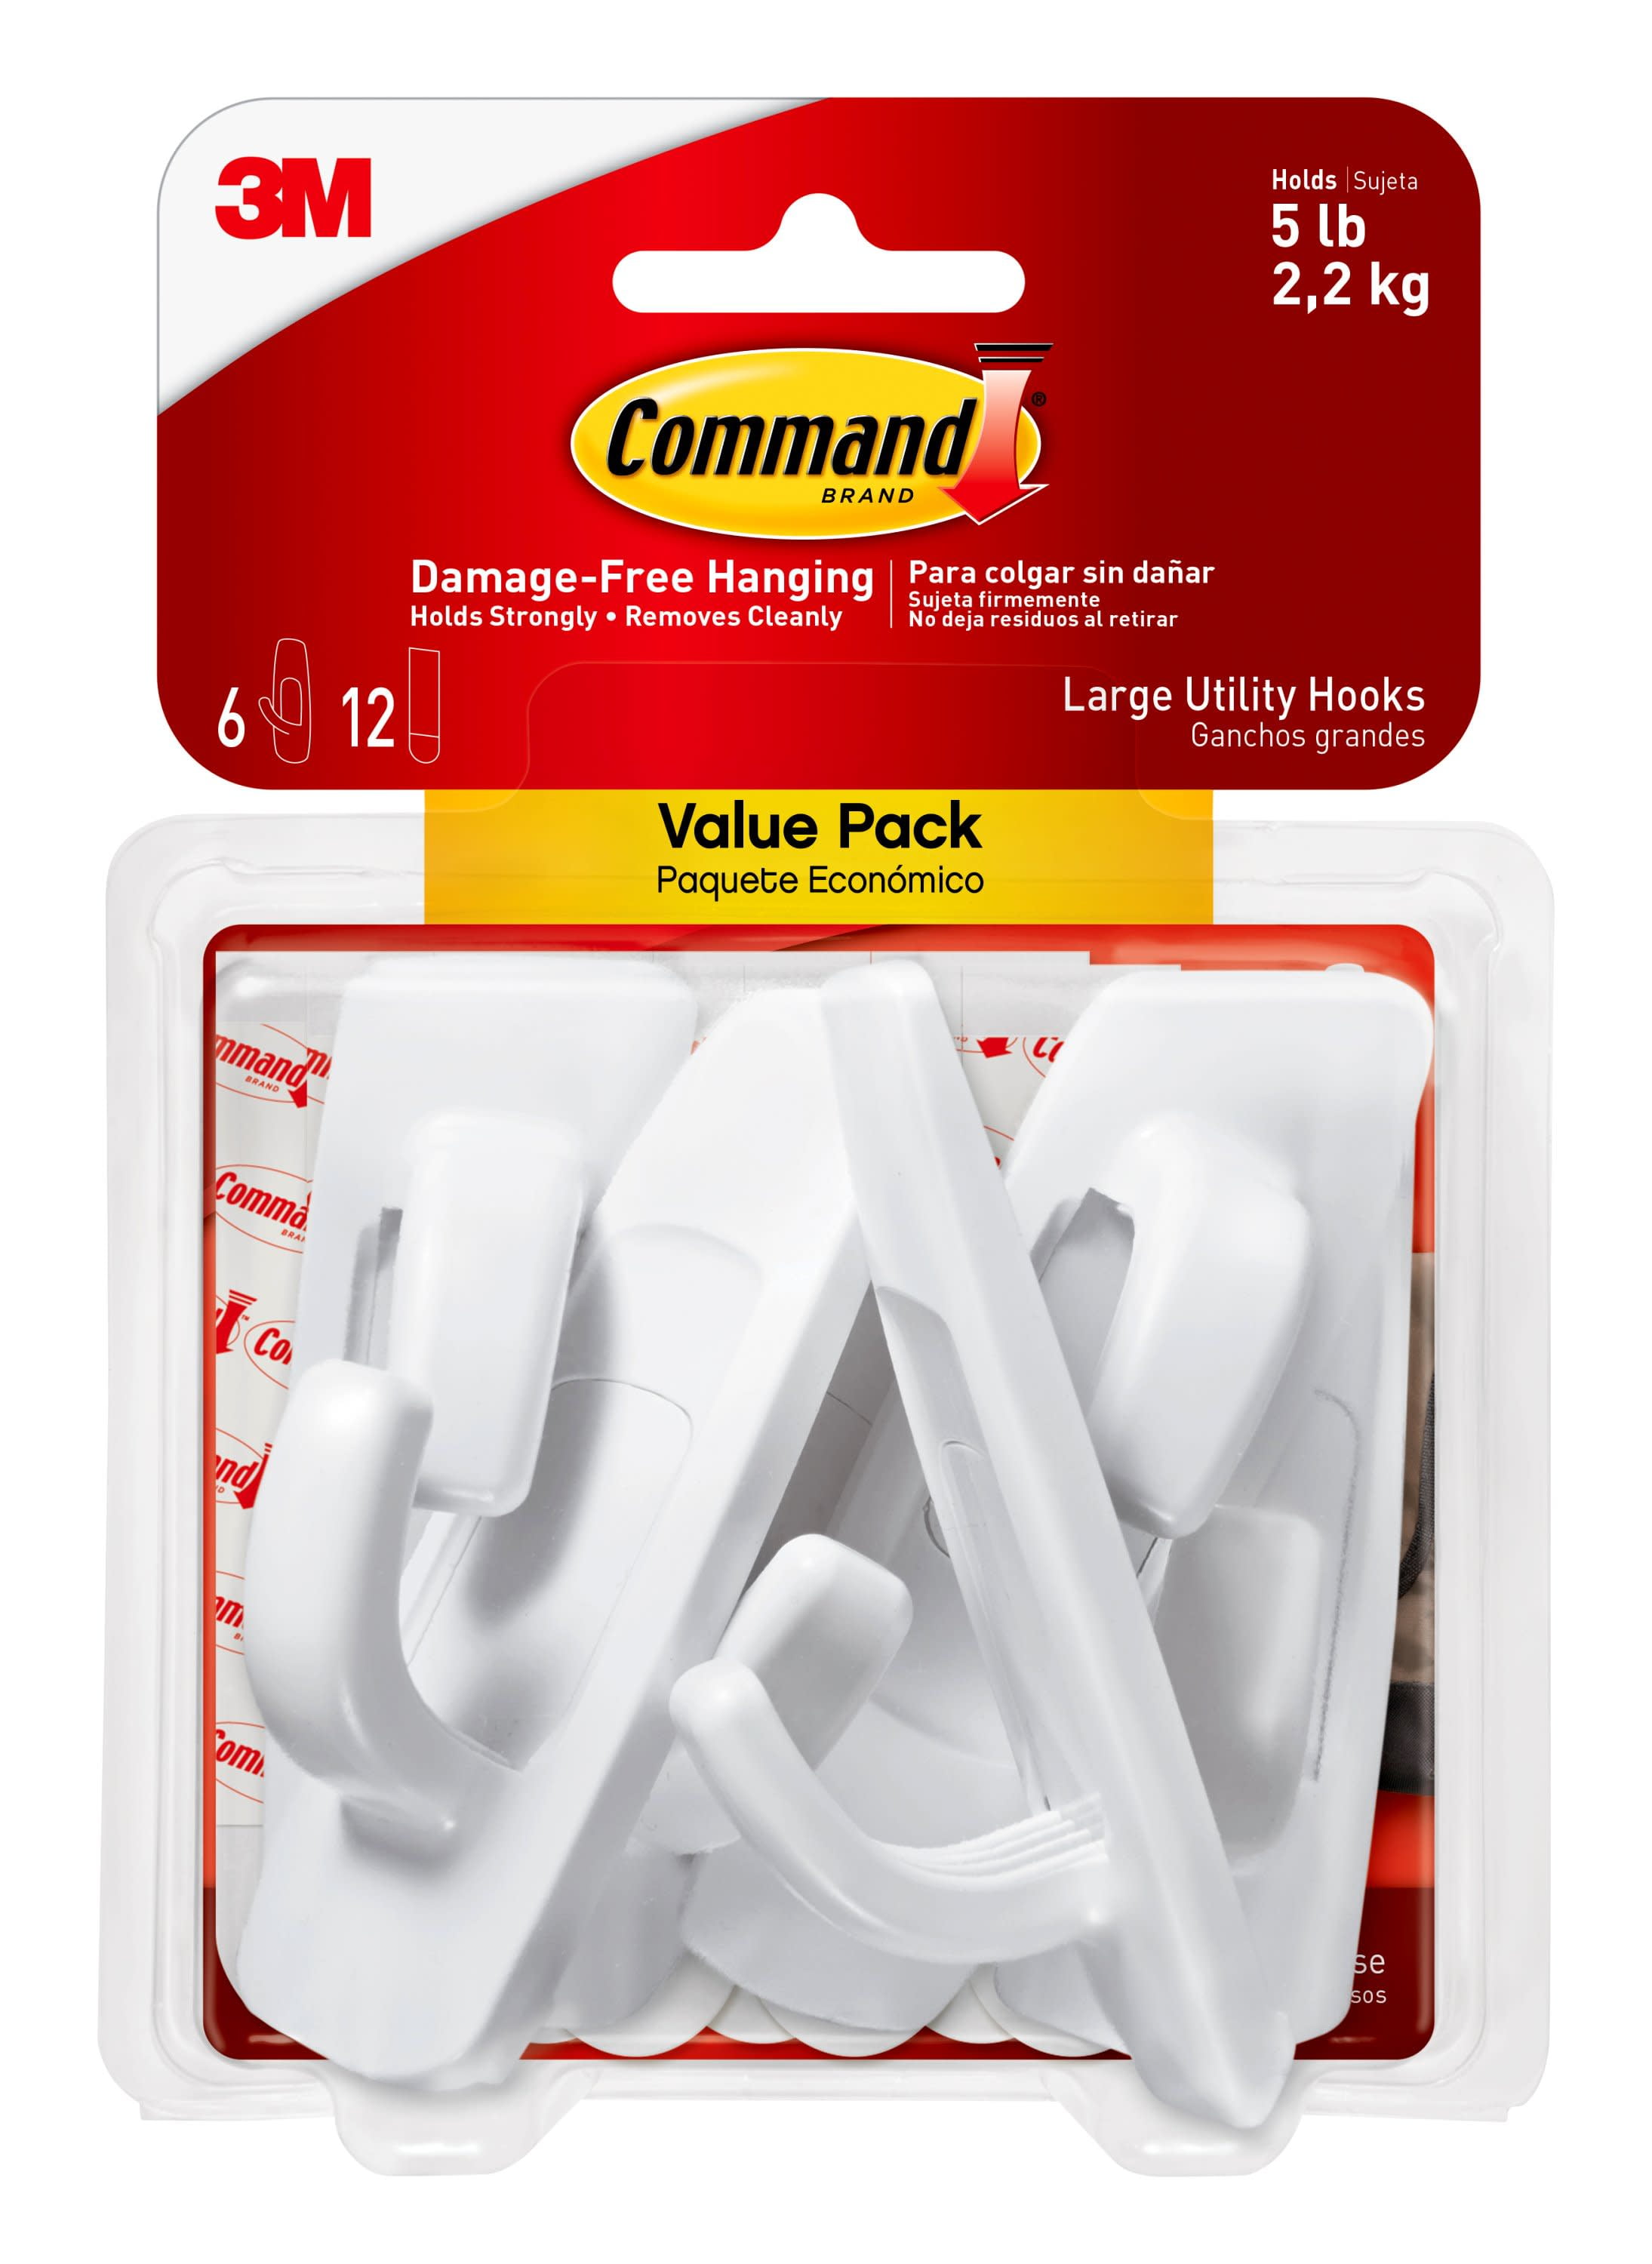 Command Large Wall Hooks, Damage Free Hanging Wall Hooks with Adhesive  Strips, No Tools Wall Hooks for Hanging Decorations in Living Spaces, 1  Clear